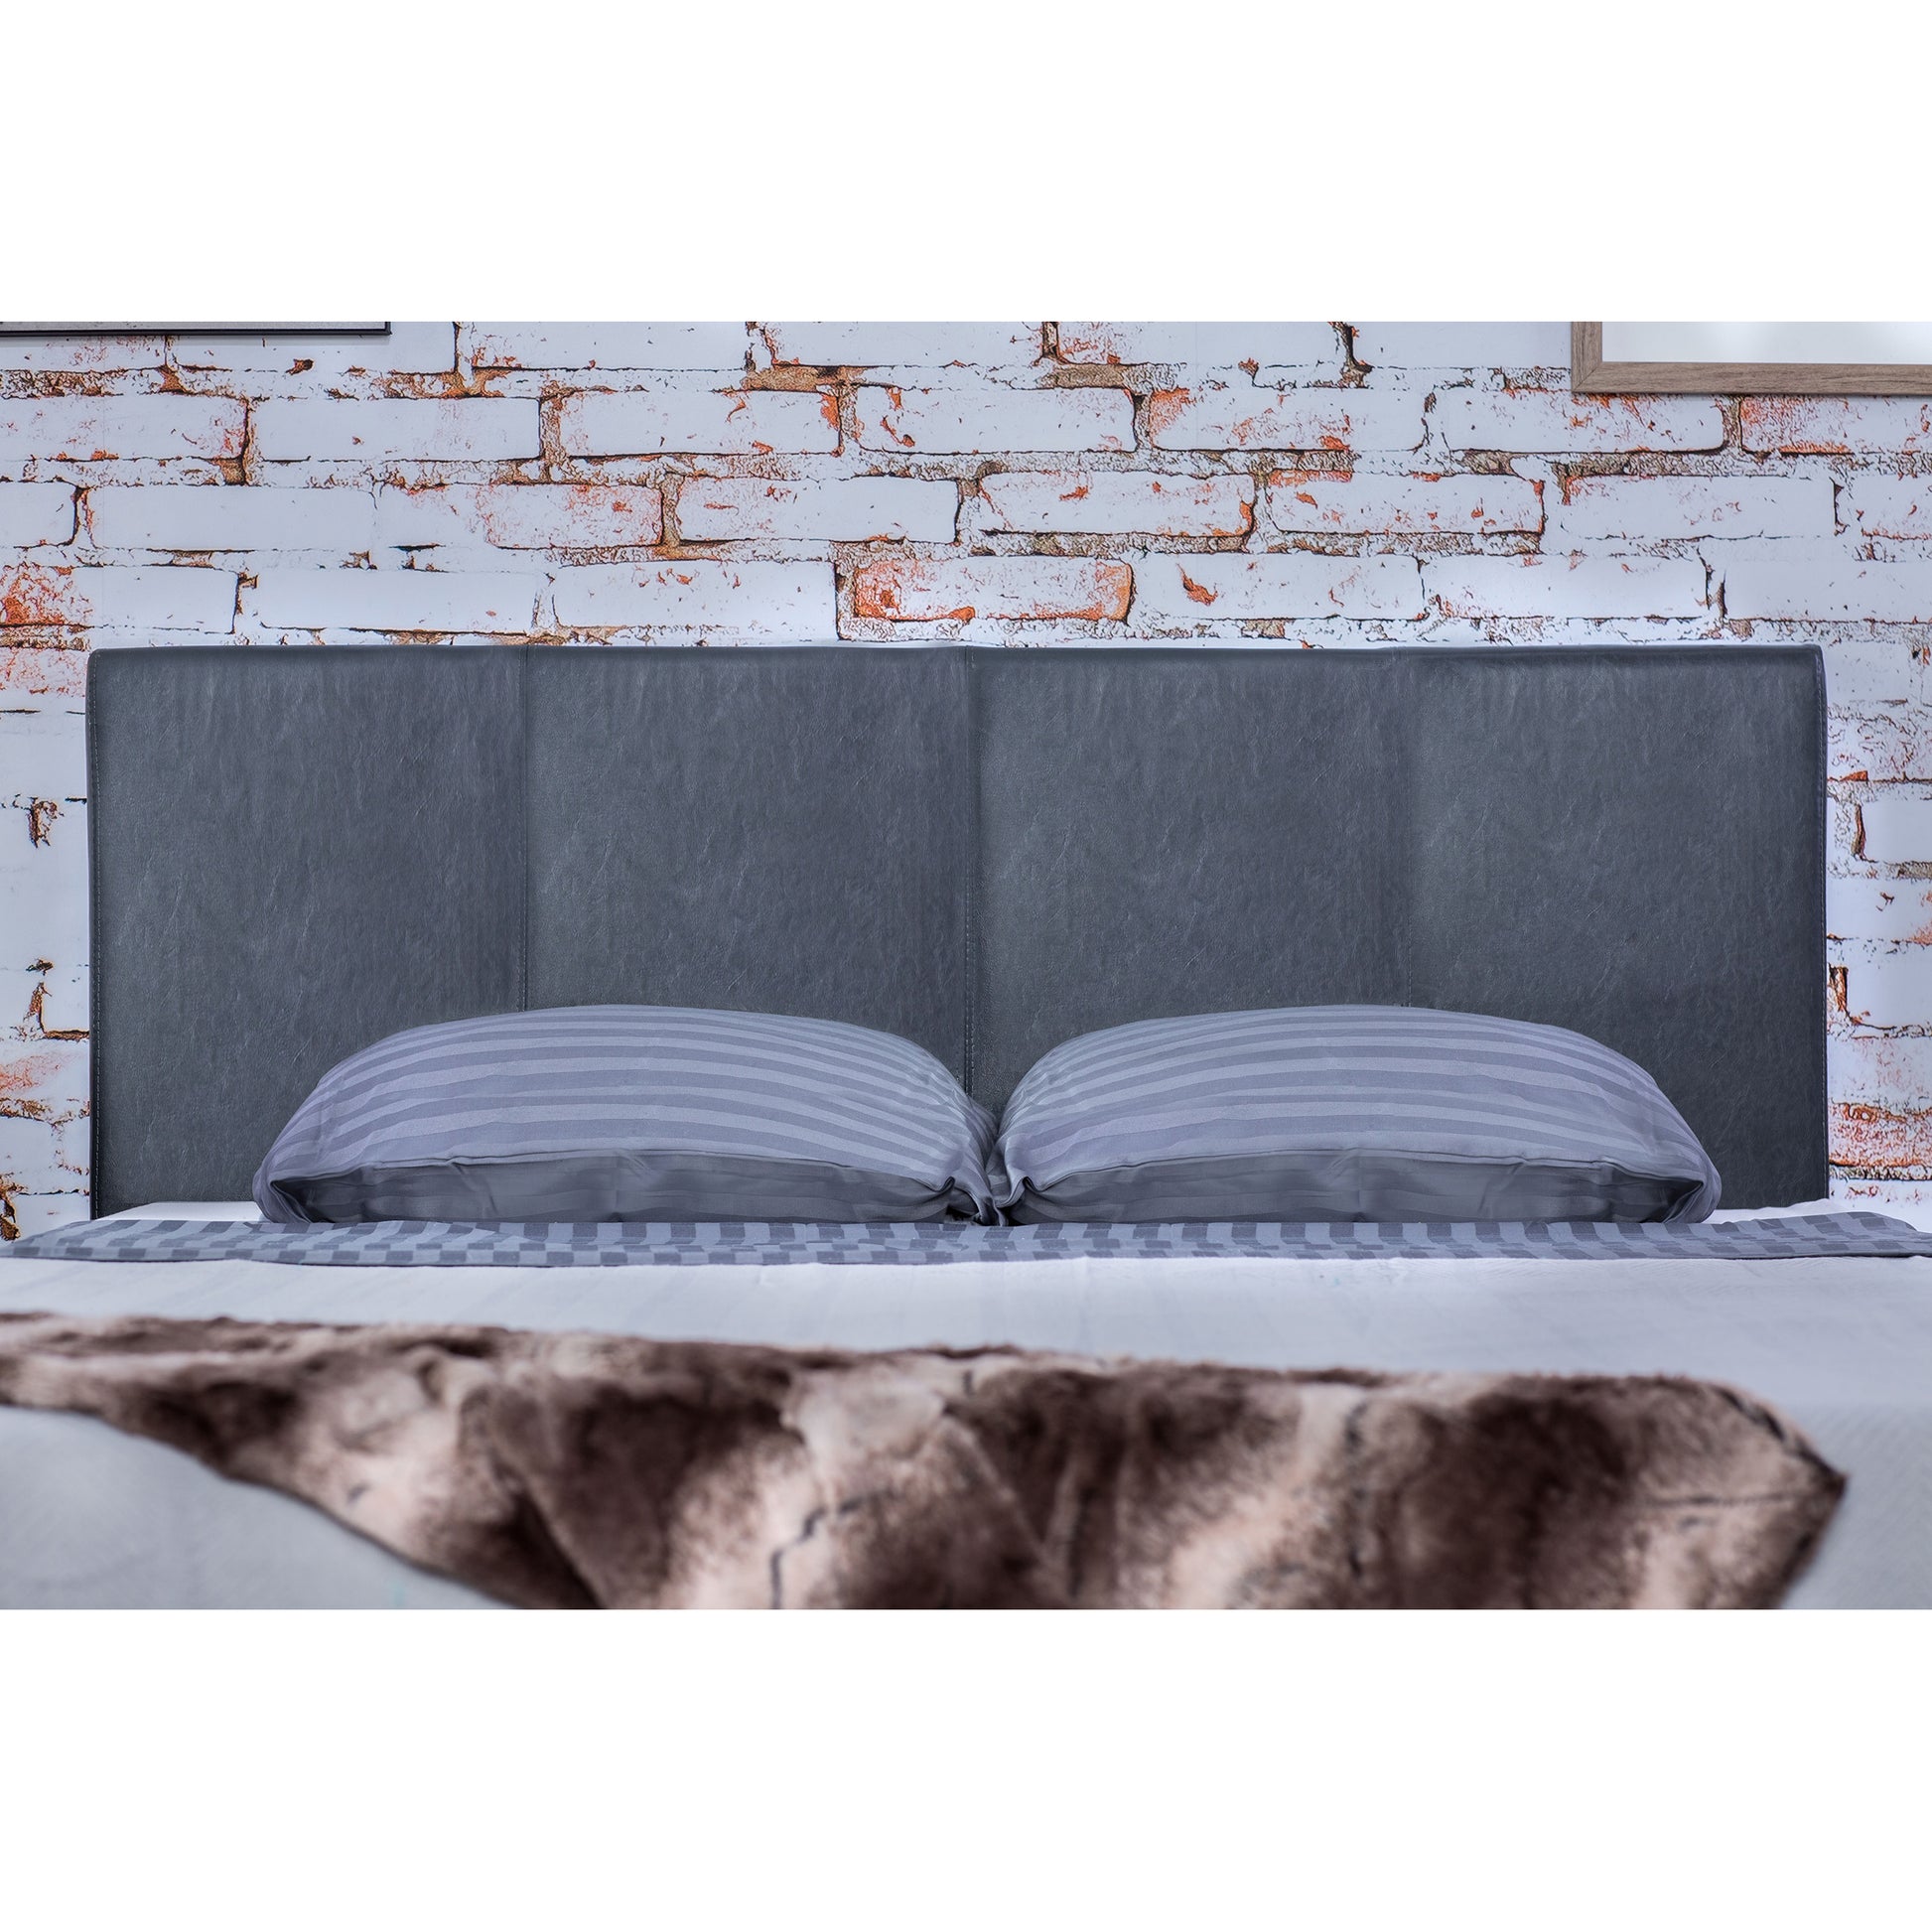 Front-facing headboard focus on a contemporary gray faux leather twin platform bed in a bedroom with accessories